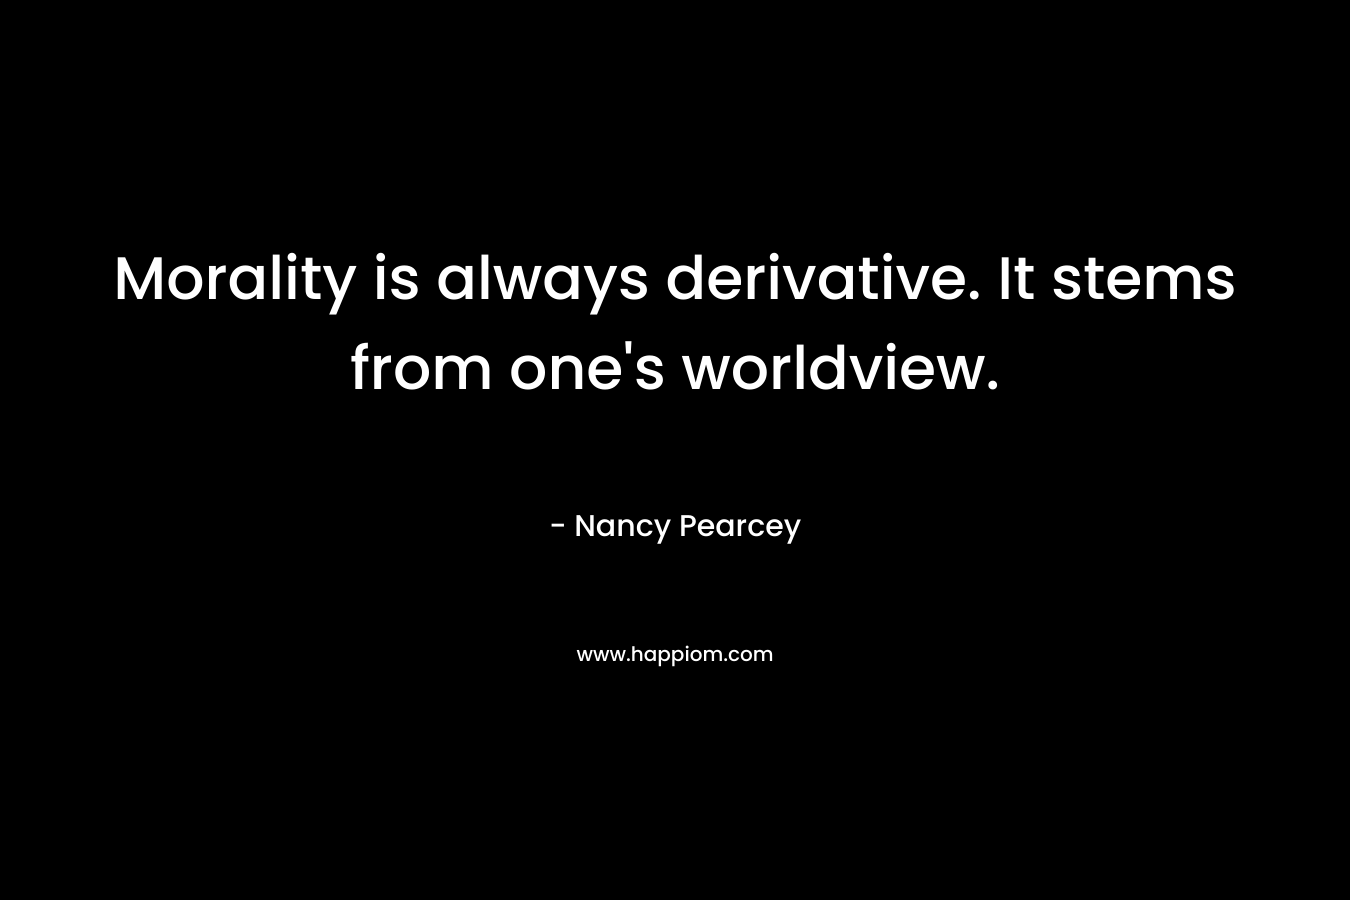 Morality is always derivative. It stems from one’s worldview. – Nancy Pearcey